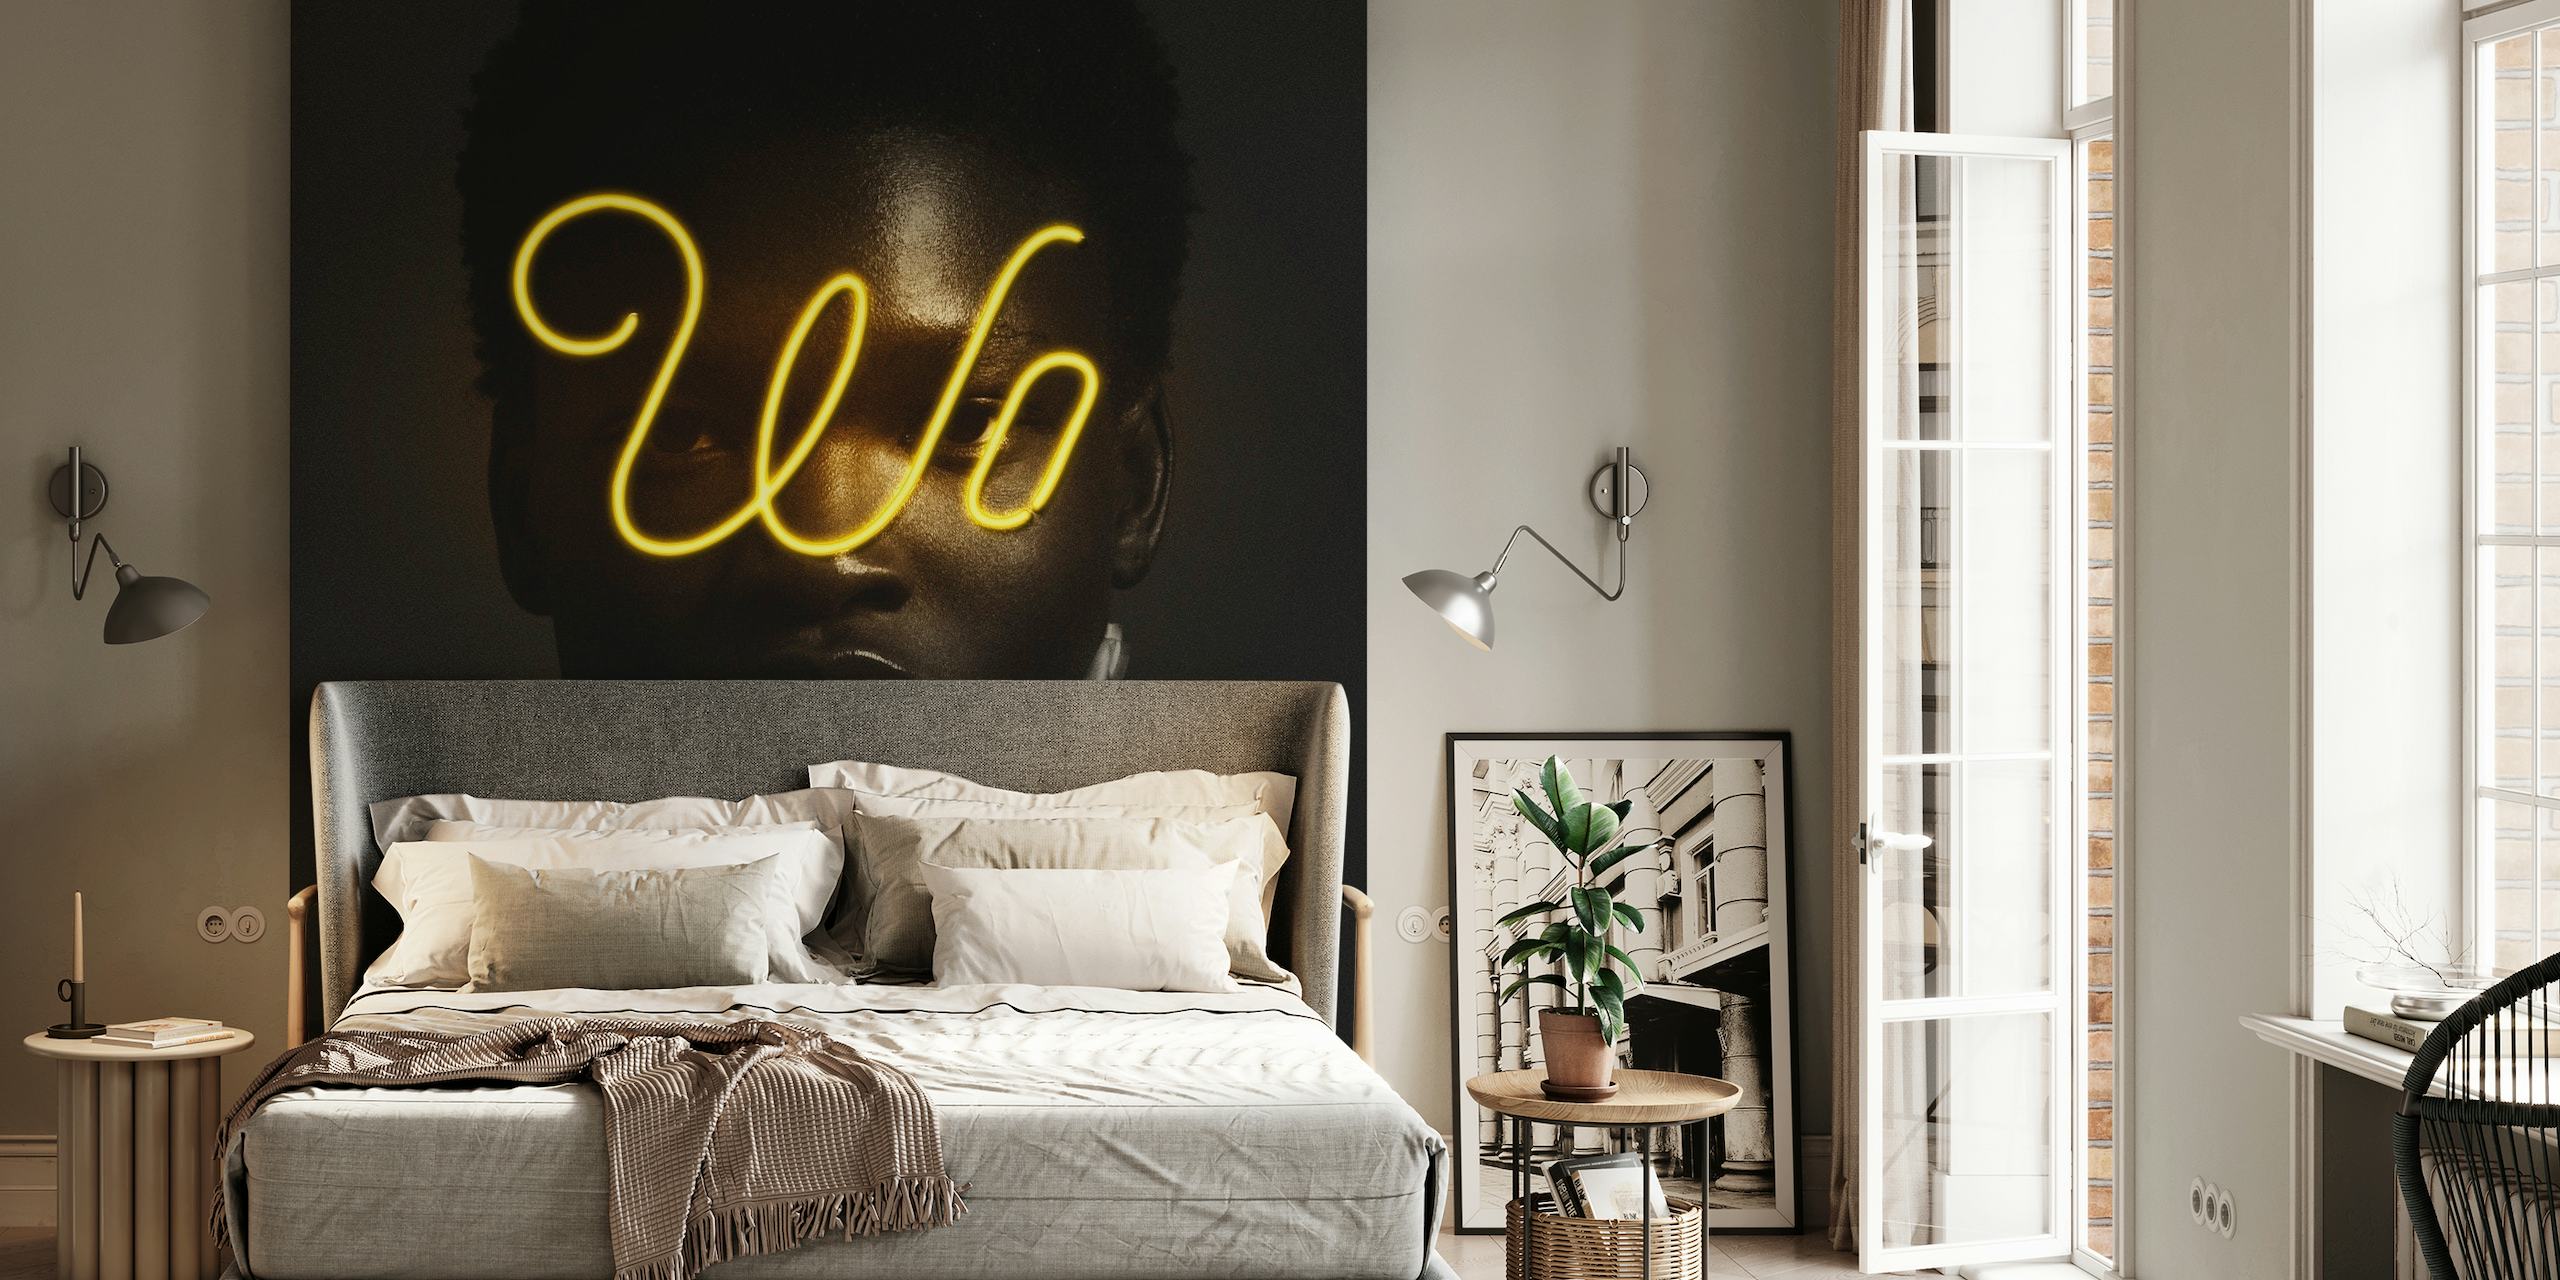 African woman silhouette with neon light accents wall mural